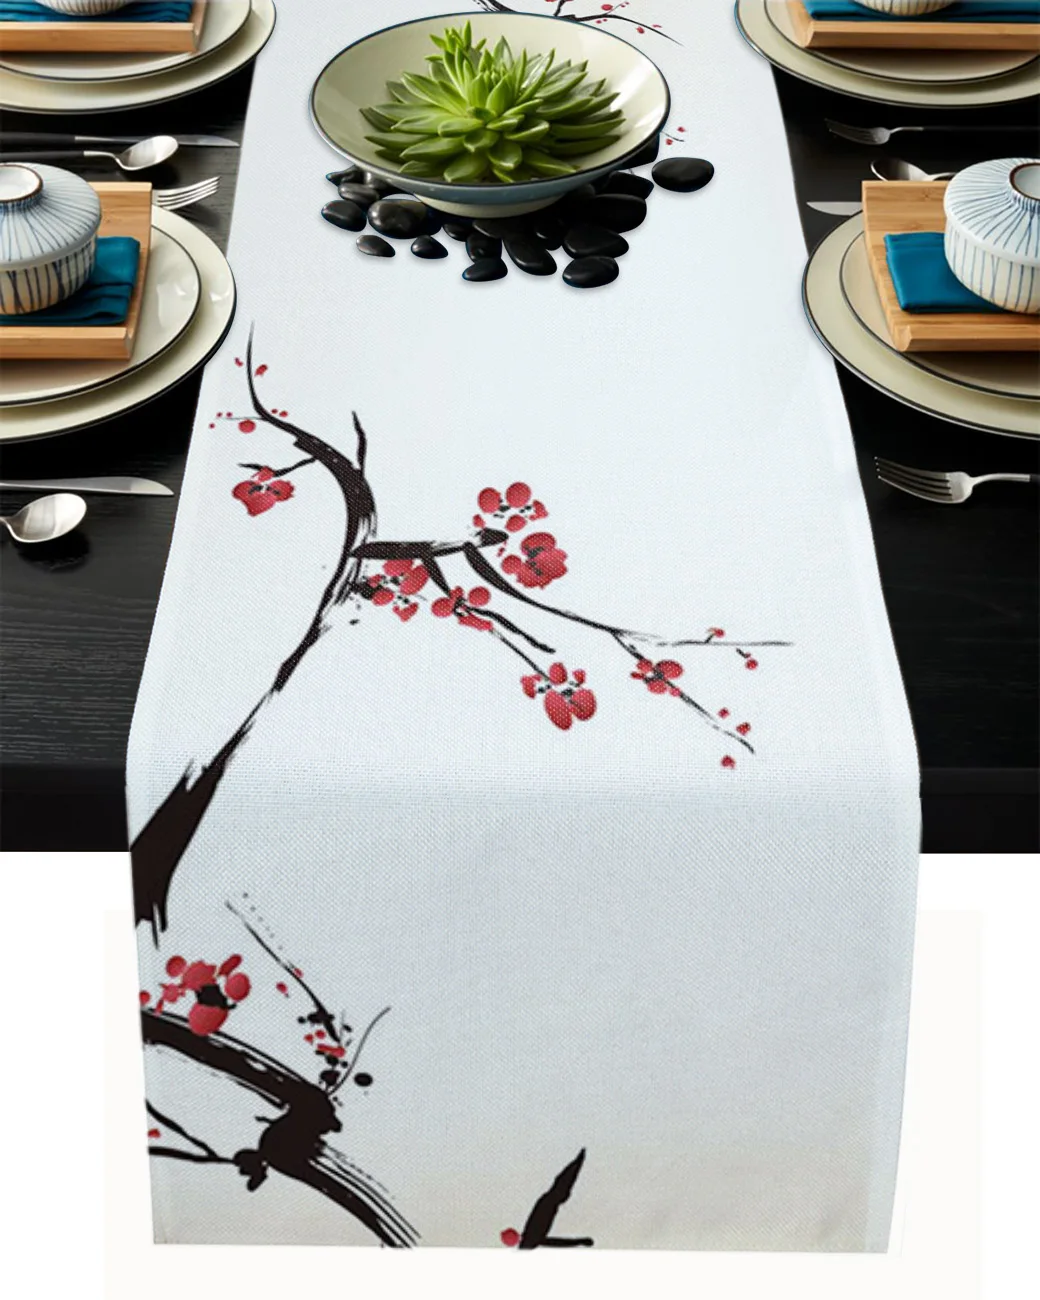 

Red Flower Plum Flower Ink Scenery Table Runner Kitchen Decor Tablecloth Placemat Hotel Home Wedding Decor Table Runners